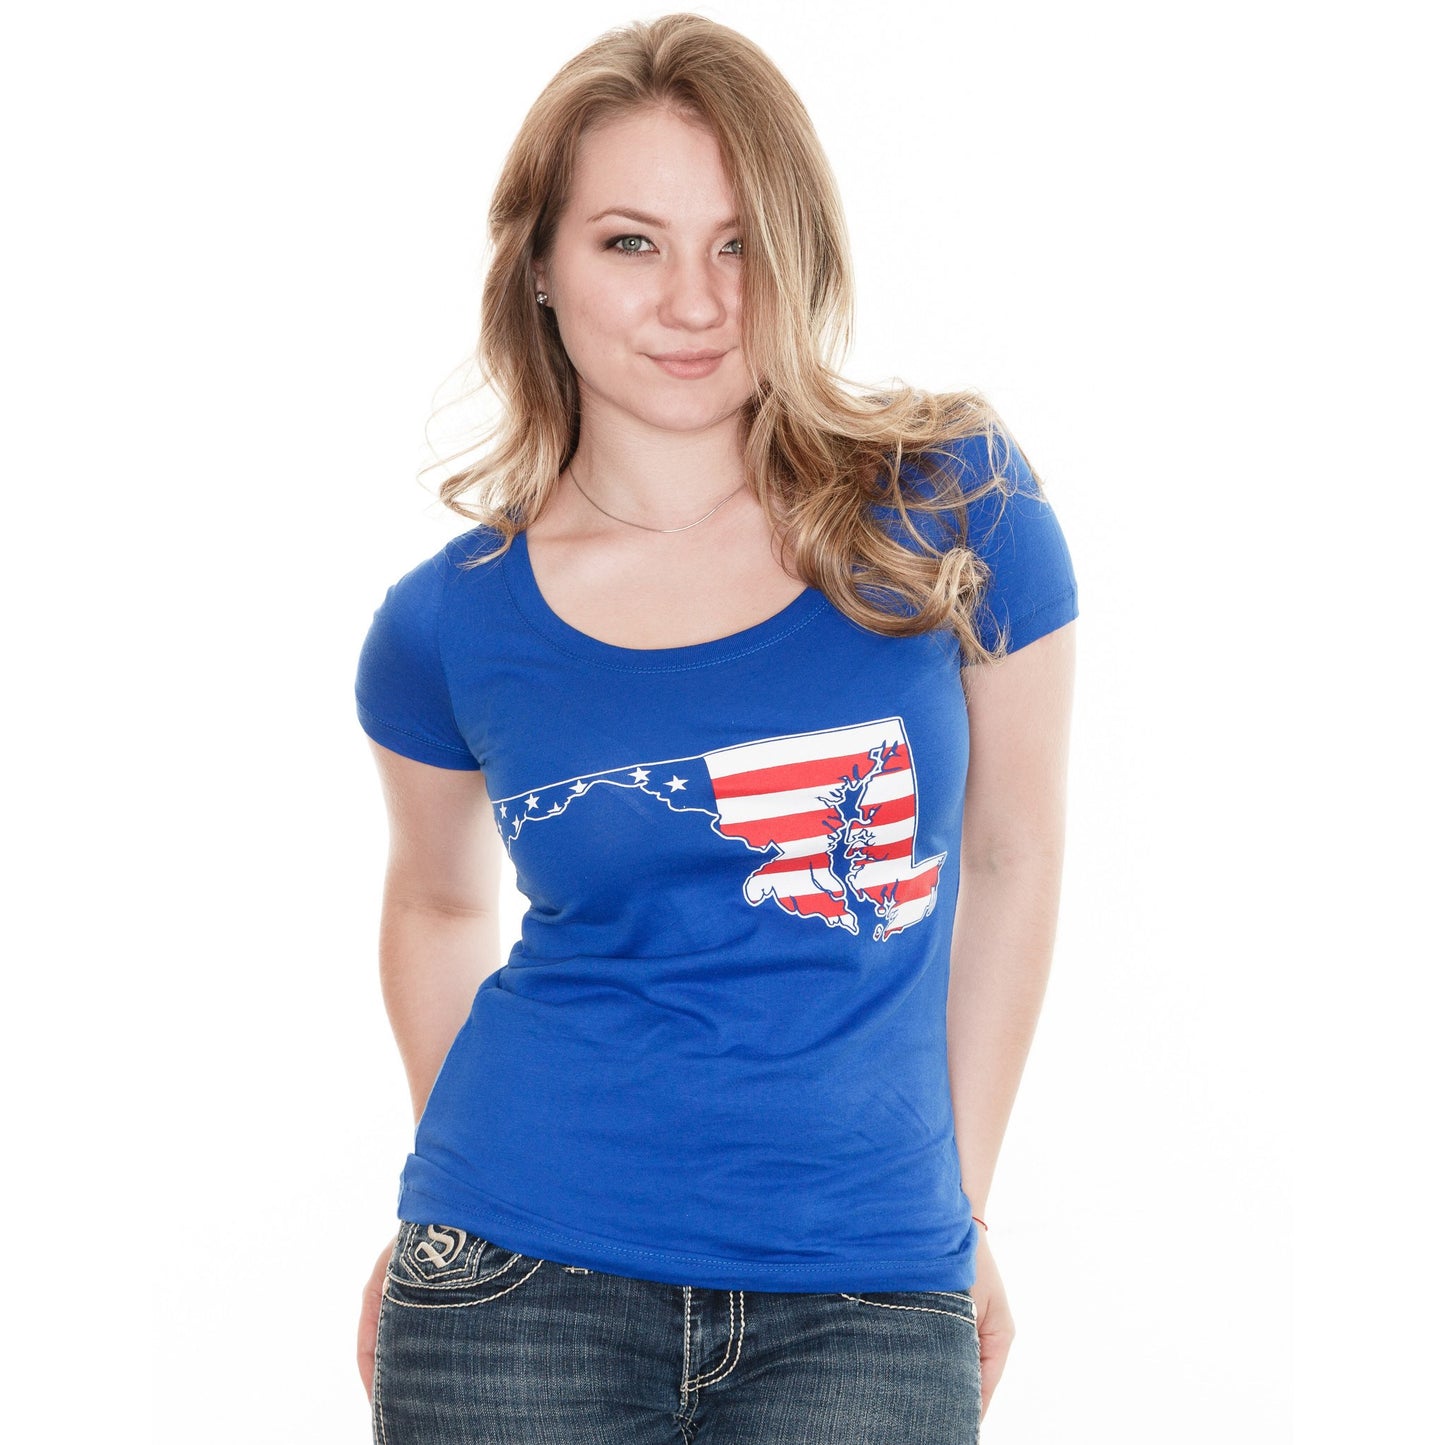 American State of Maryland (Royal Blue) / Ladies Scoop Neck Shirt - Route One Apparel